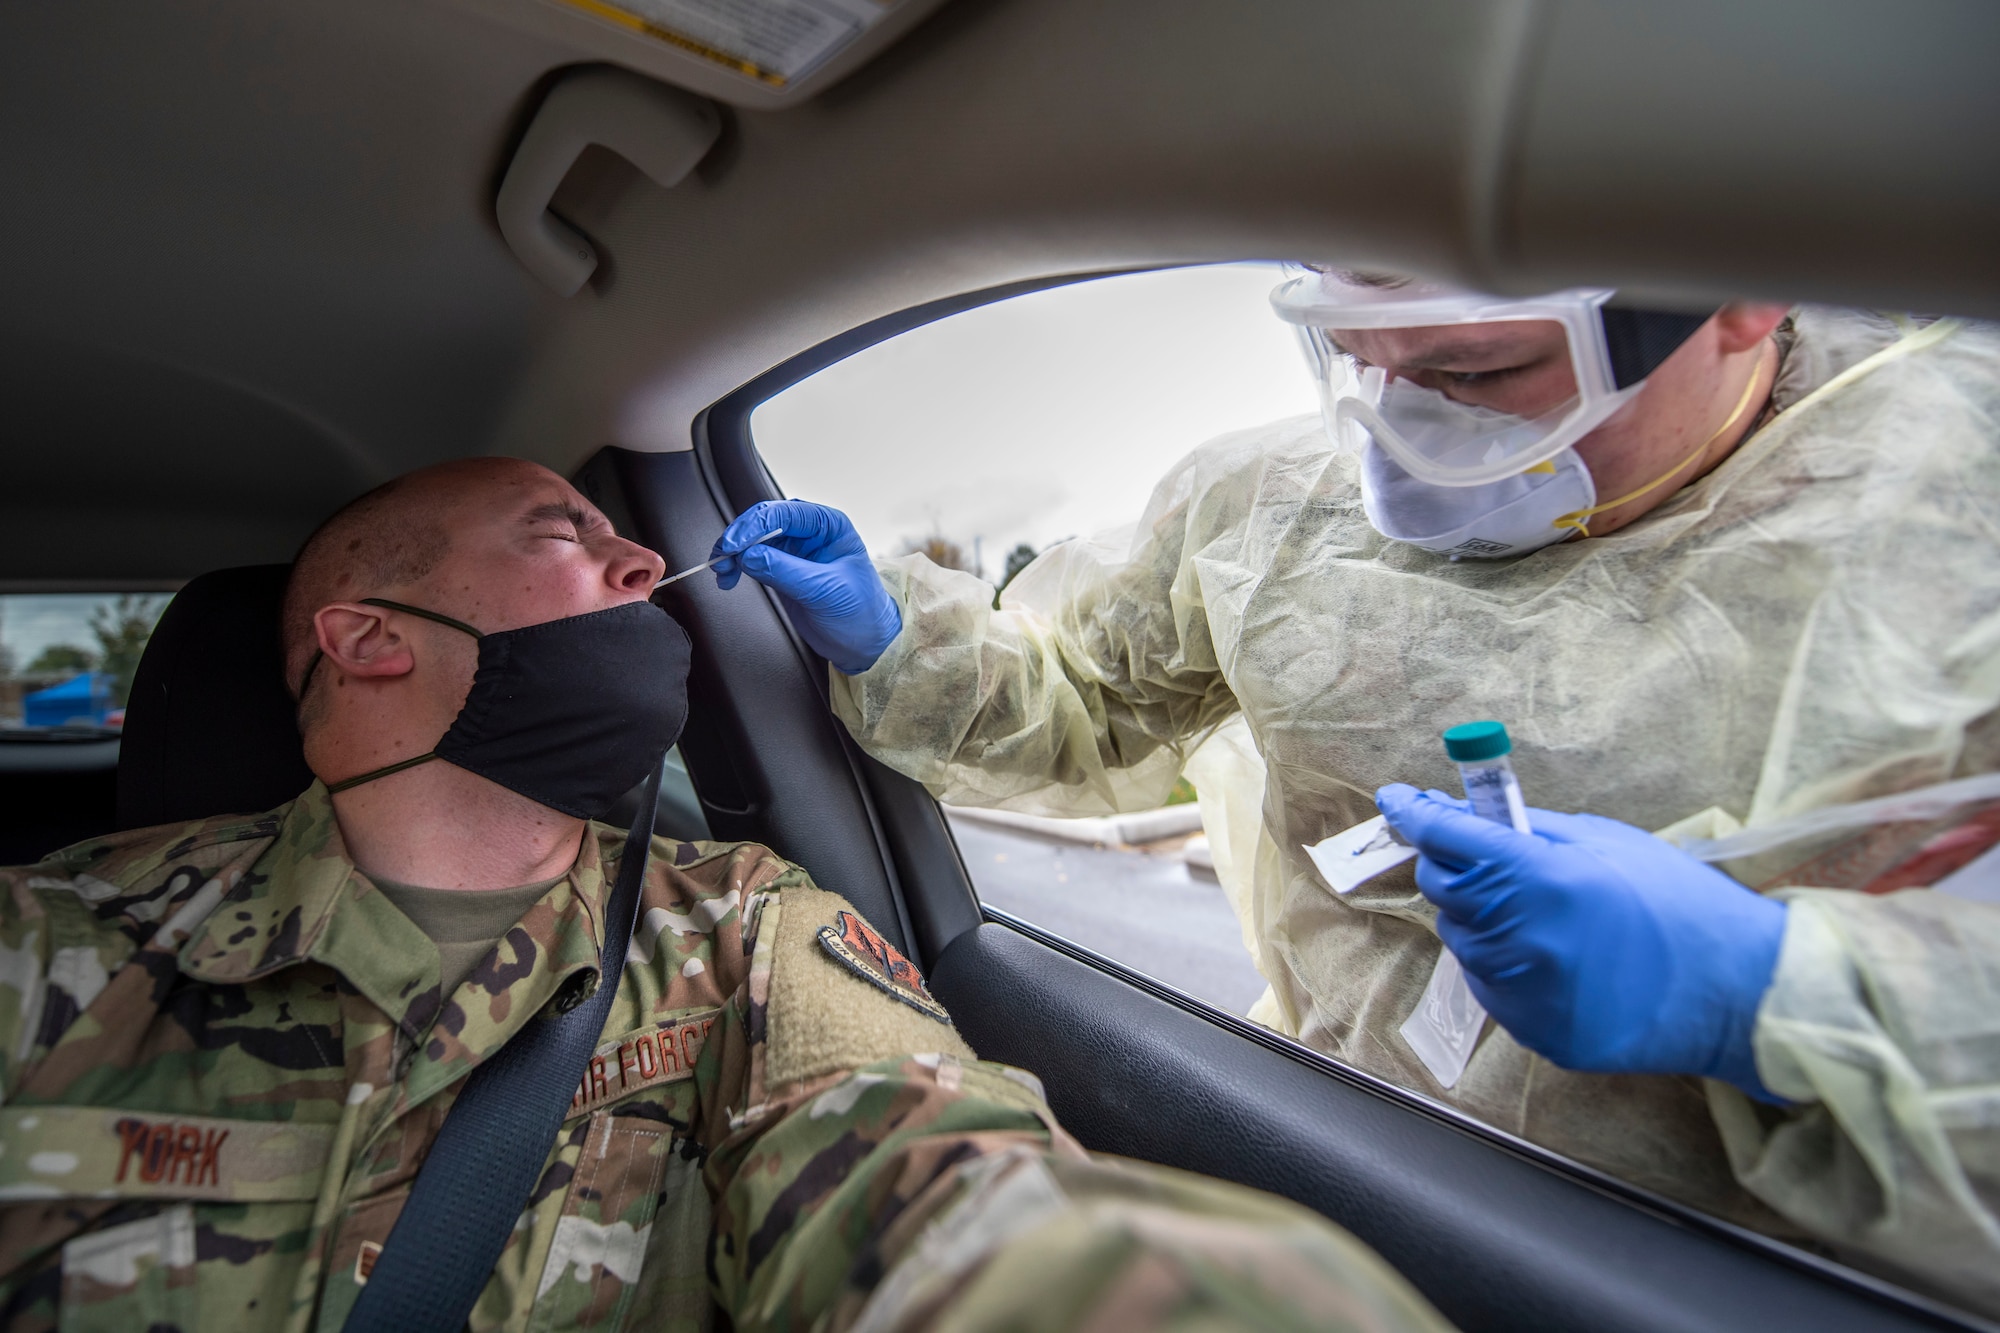 U.S. Army Pfc. Kaitlin Conway, a Soldier assigned to the Ohio National Guard, conducts a COVID-19 test during a pop-up testing drive-thru at Anthony Wayne Junior High School in Whitehouse, Ohio, Oct. 19, 2020.